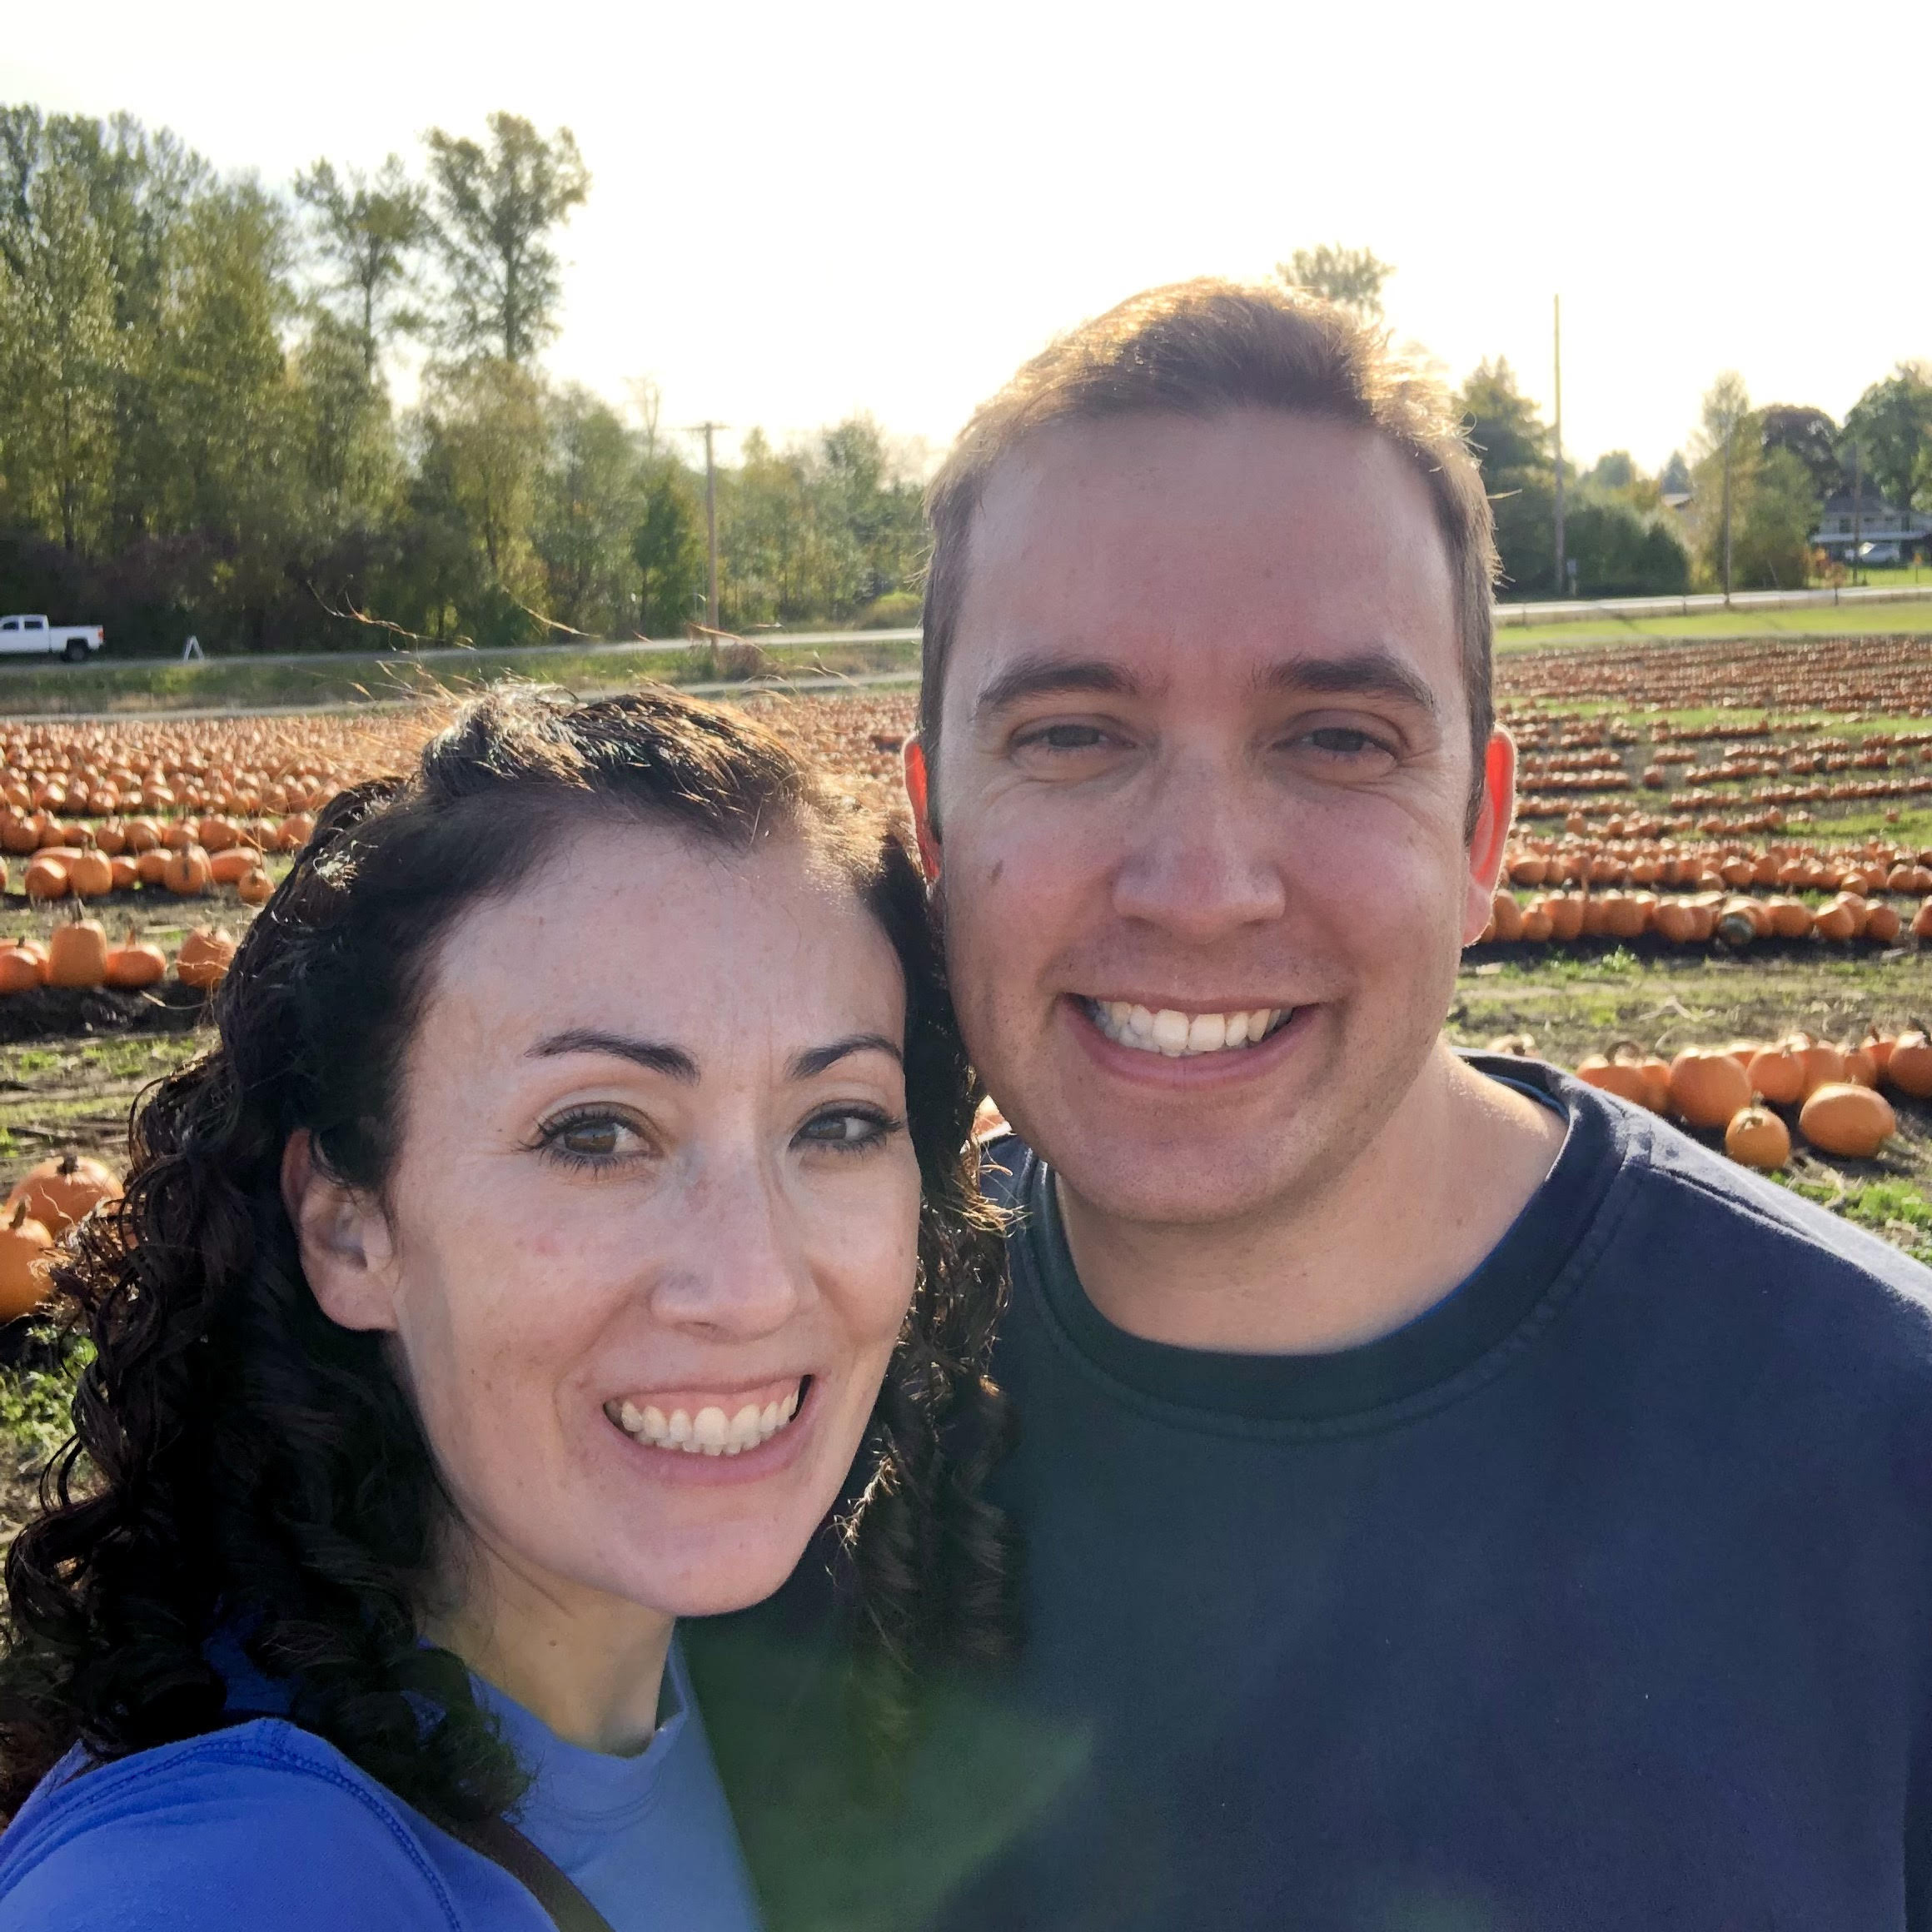 Fall Adventures to the pumpkin patch.